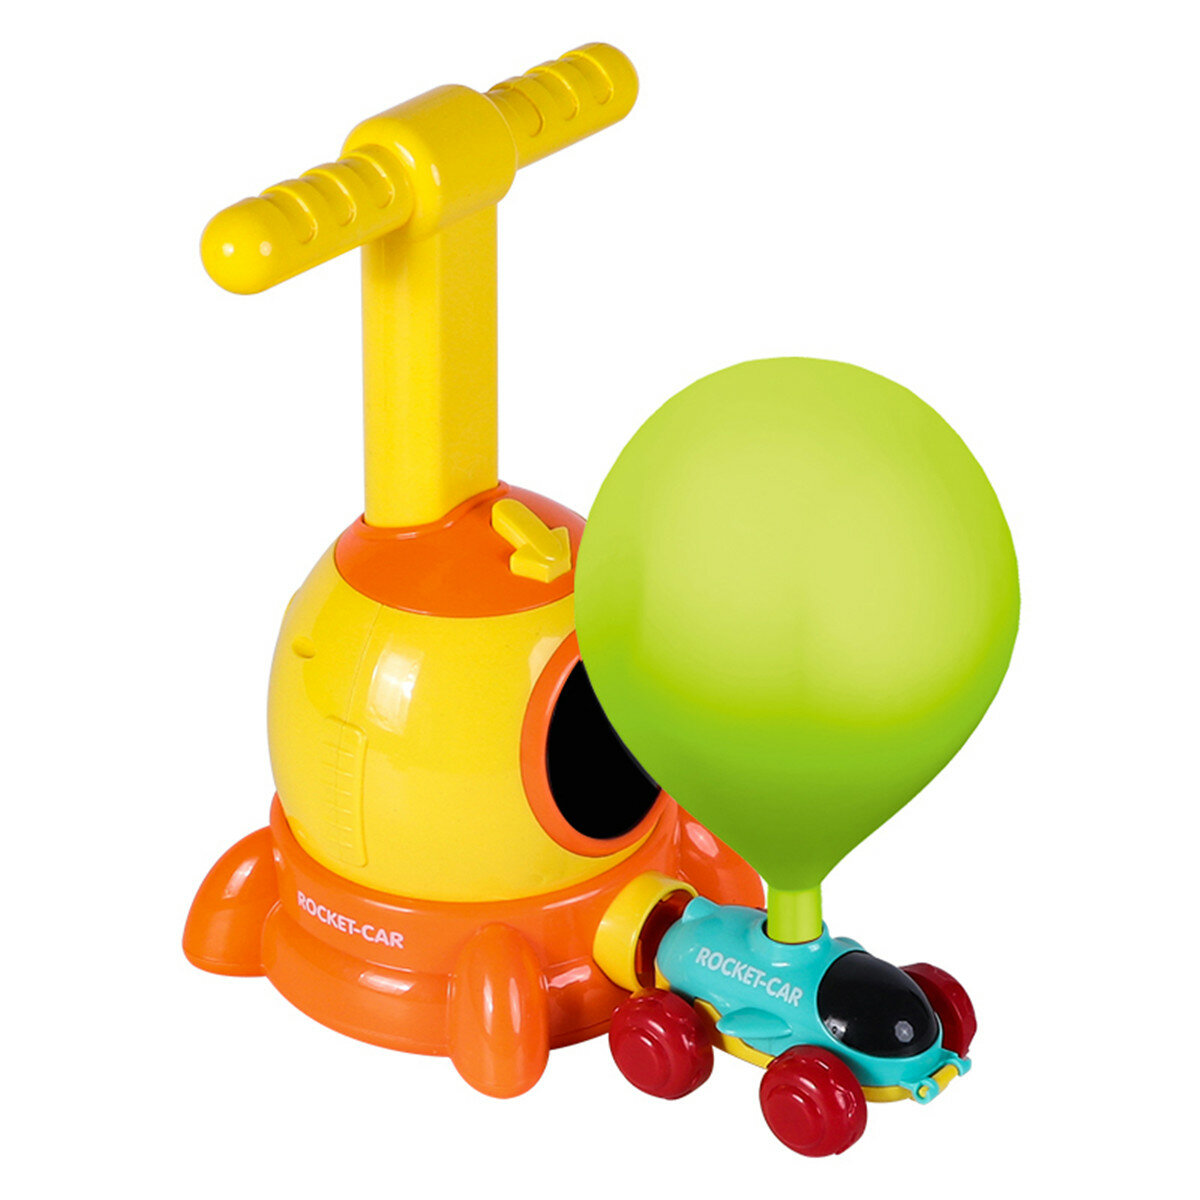 Inertial Power Balloon Car Intellectual Development Learning Education Science Experiment Toy for Ki